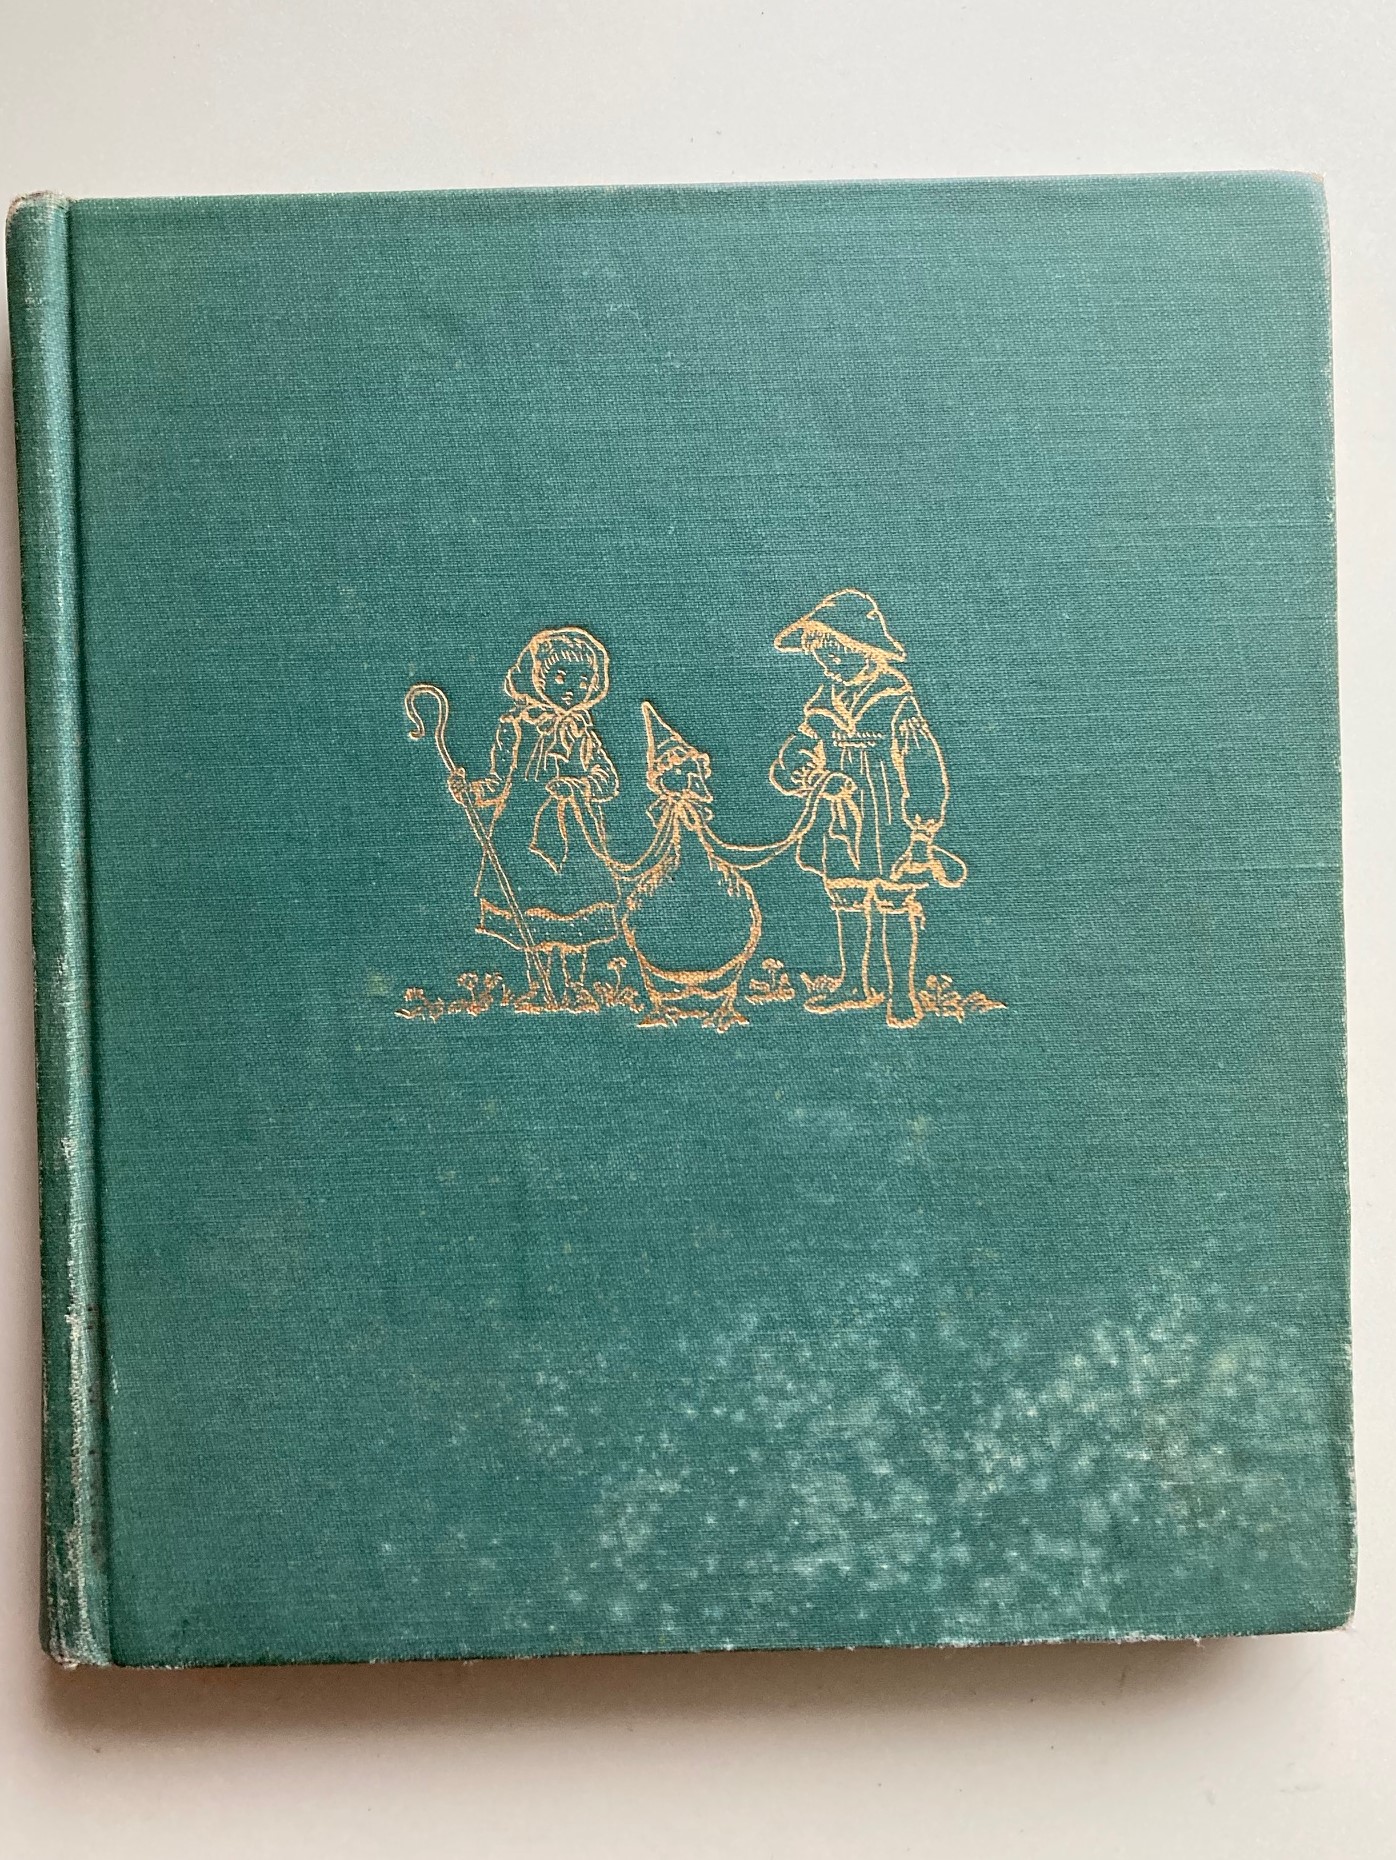 Mother Goose Signed Limited Edition Oxford 1944 By Tudor Tasha Good Hardcover 1944 1st